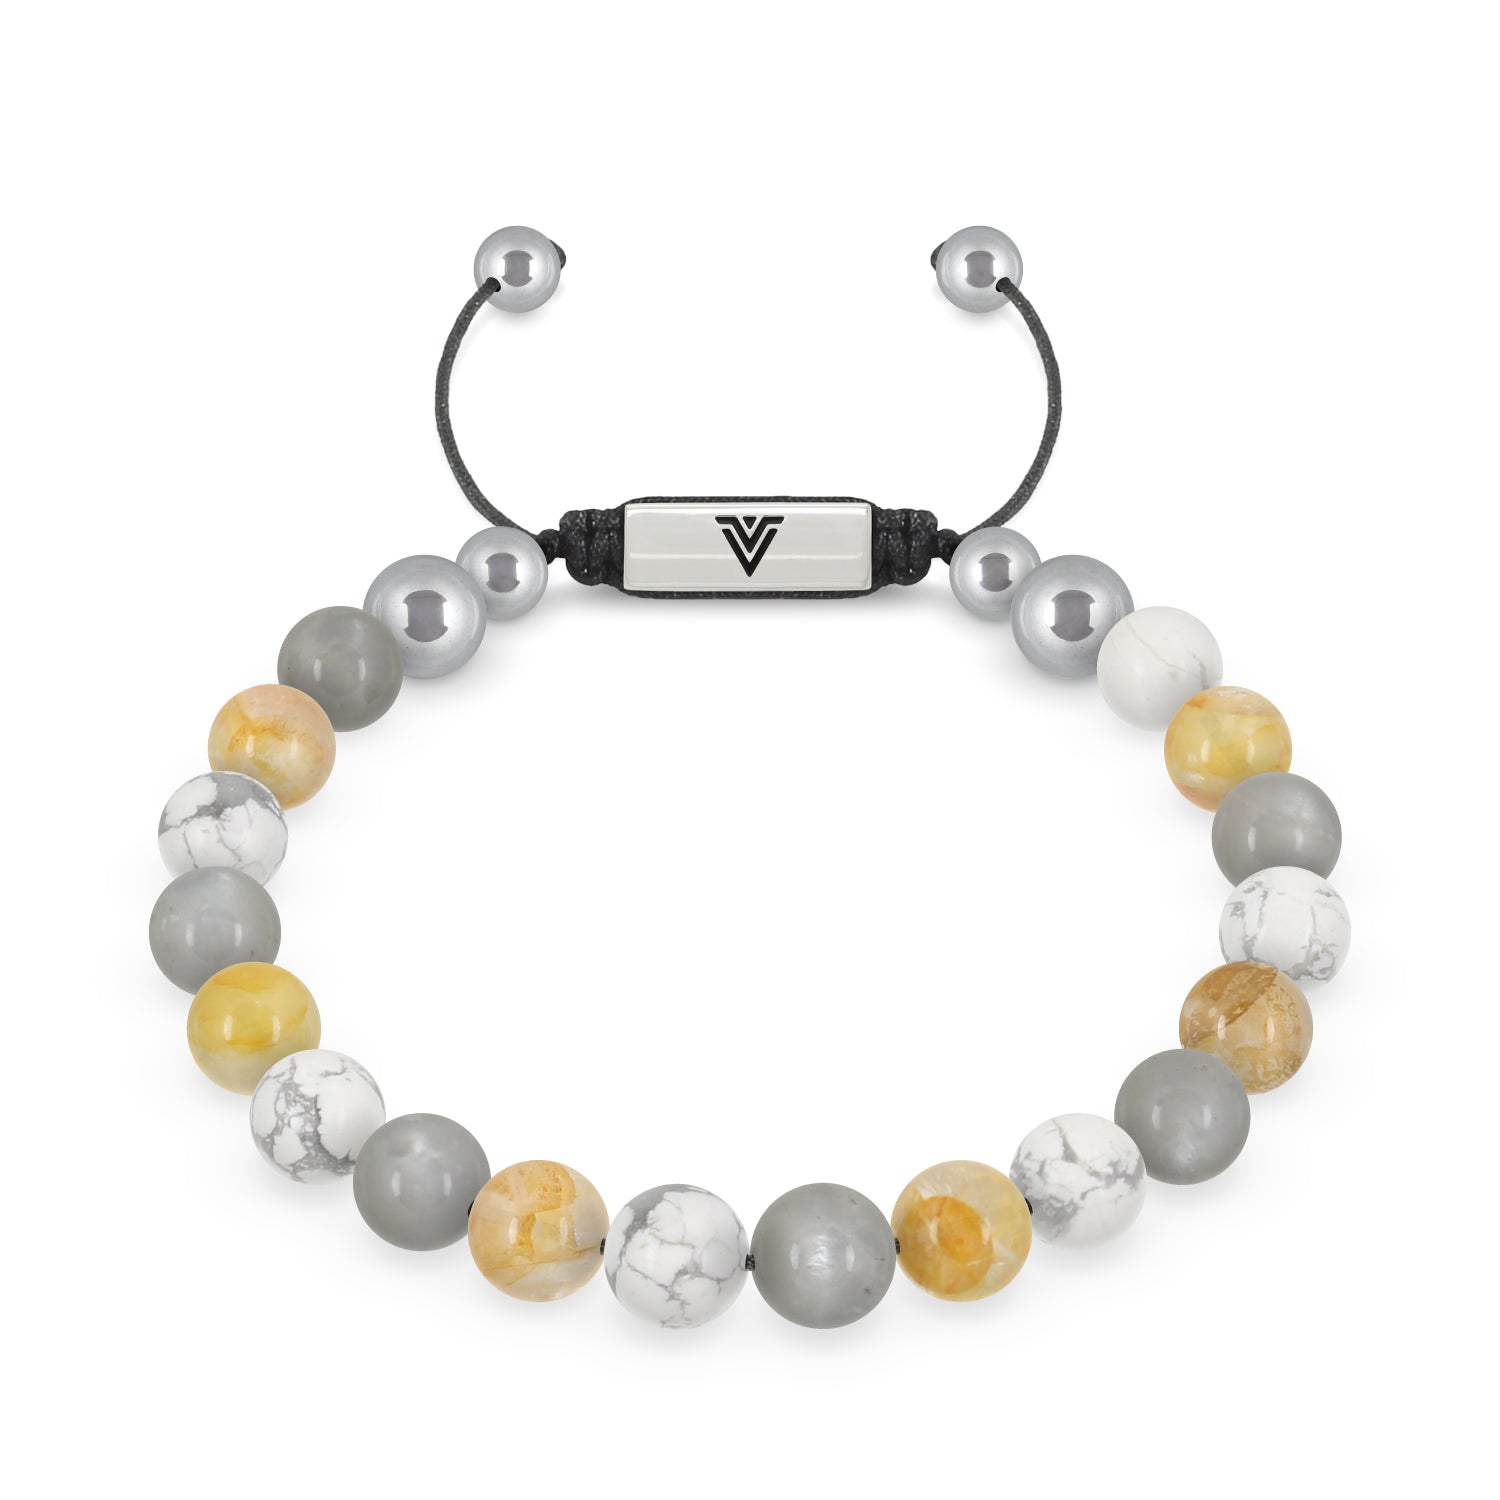 Front view of an 8mm Gemini Zodiac beaded shamballa bracelet featuring Moonstone, Citrine, & Howlite crystal and silver stainless steel logo bead made by Voltlin